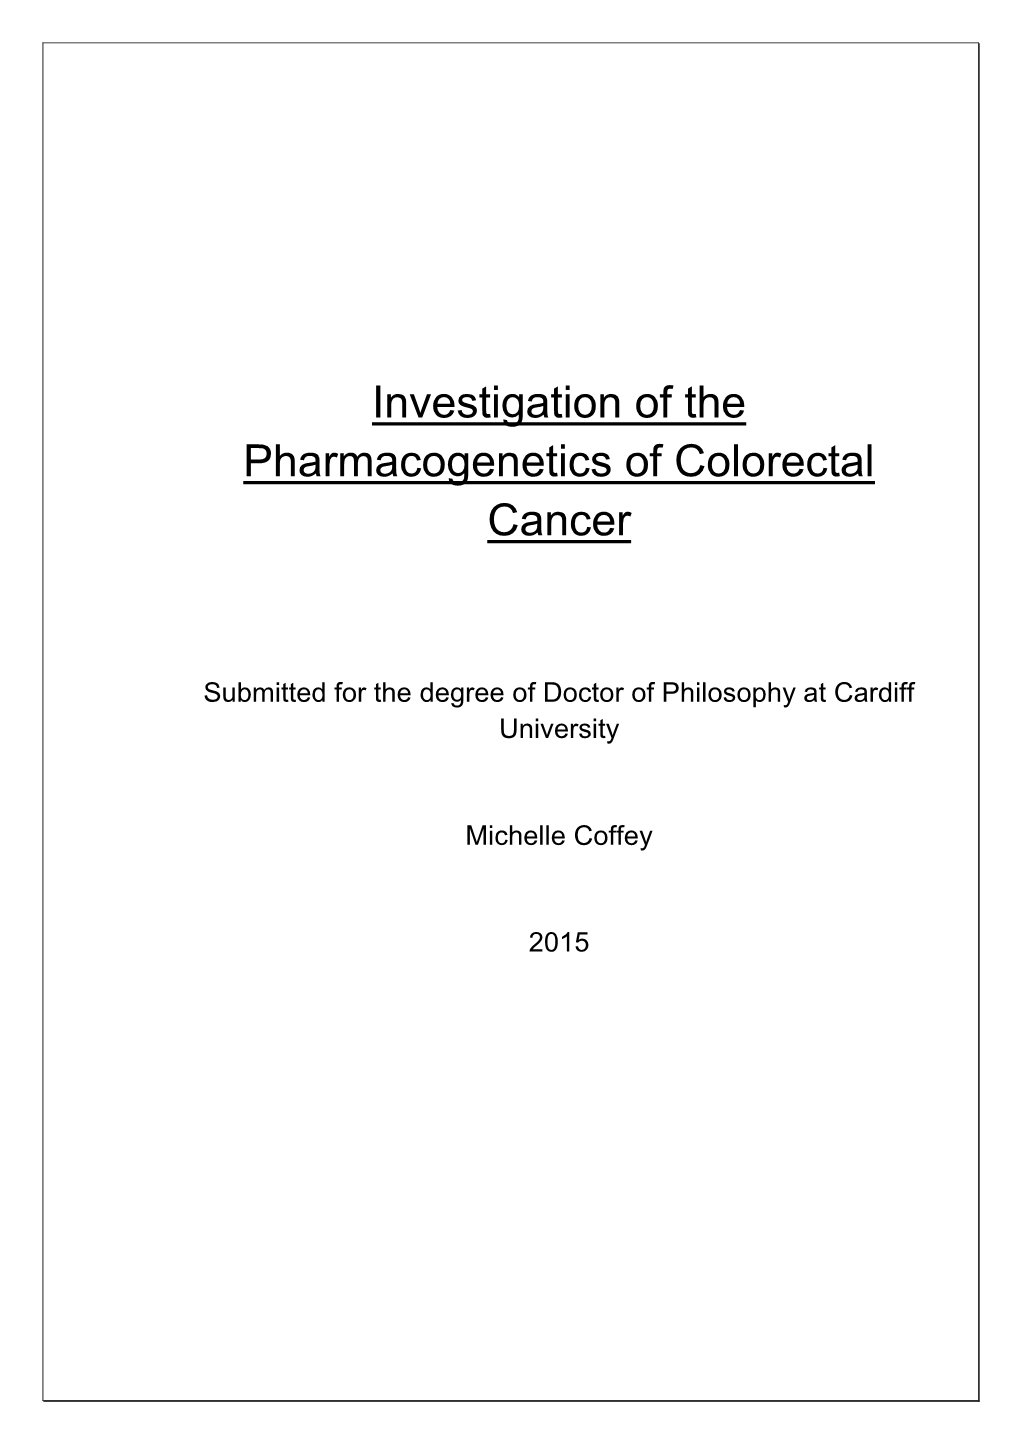 Investigation of the Pharmacogenetics of Colorectal Cancer